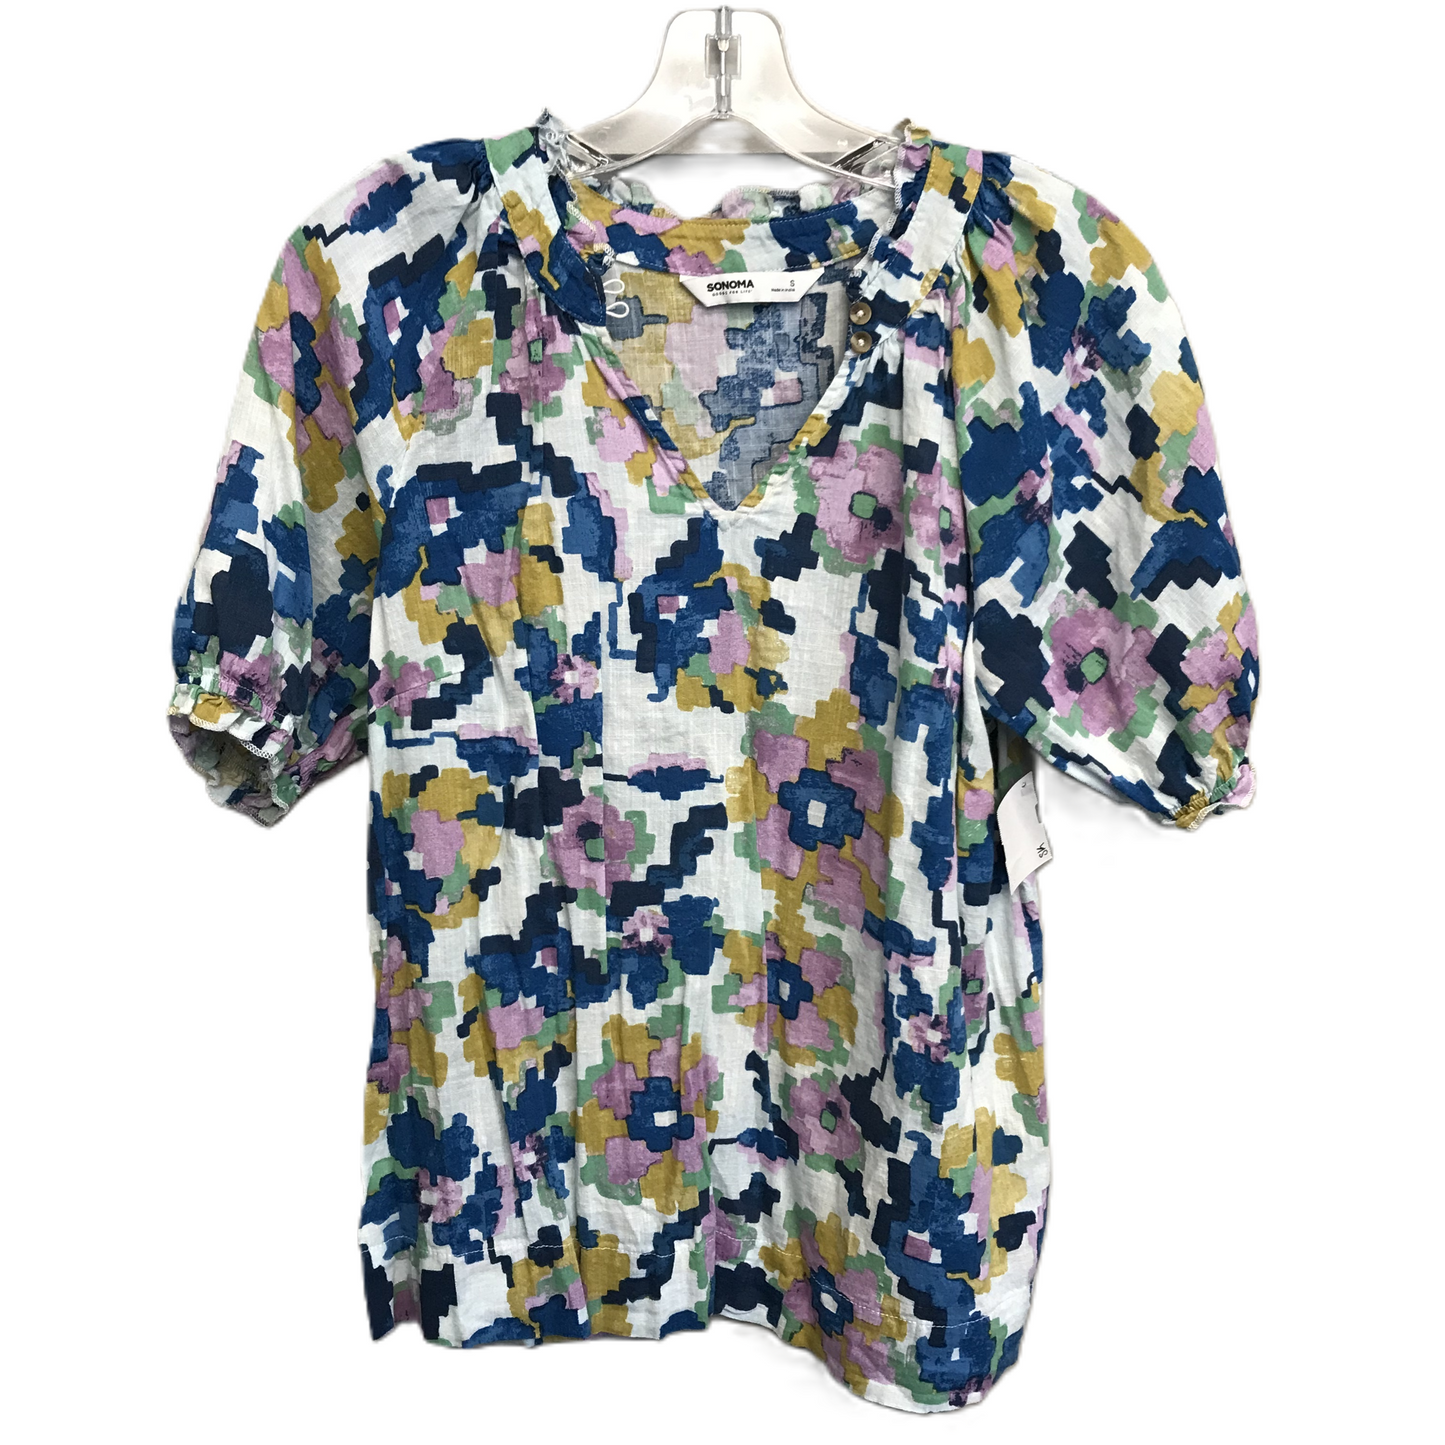 Multi-colored Top Short Sleeve By Sonoma, Size: S